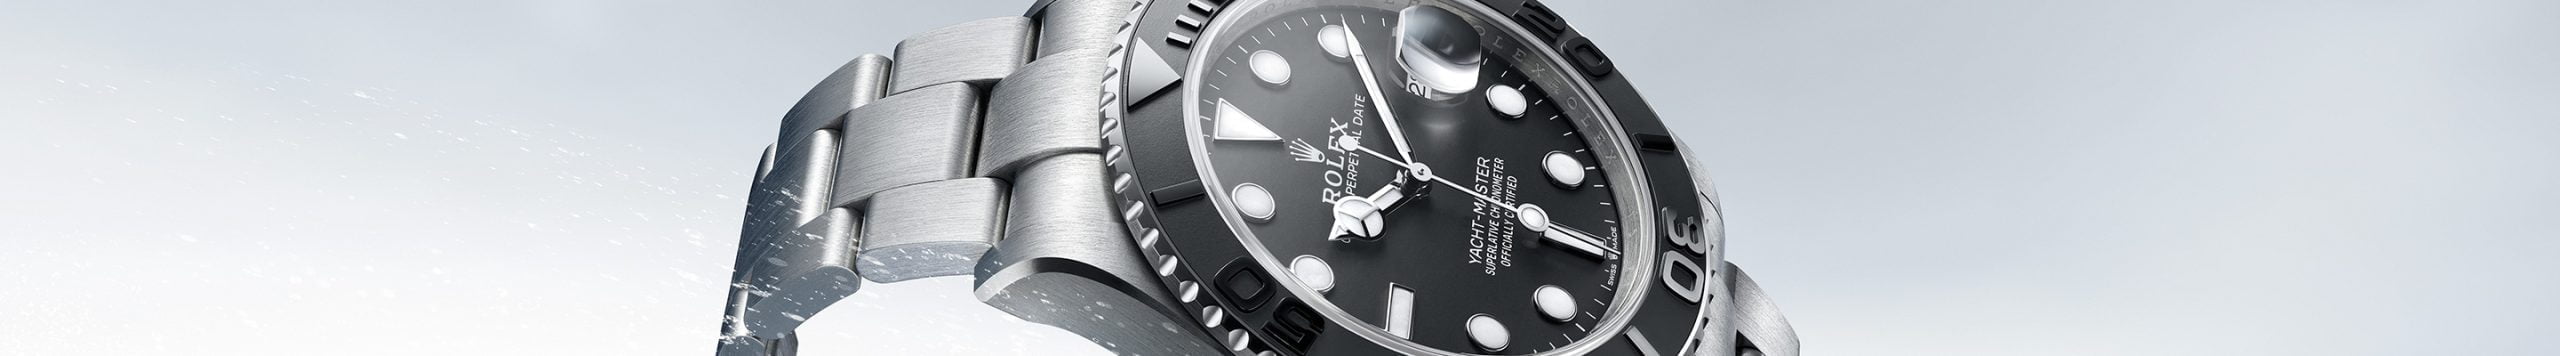 Rolex Yacht-Master collection page banner